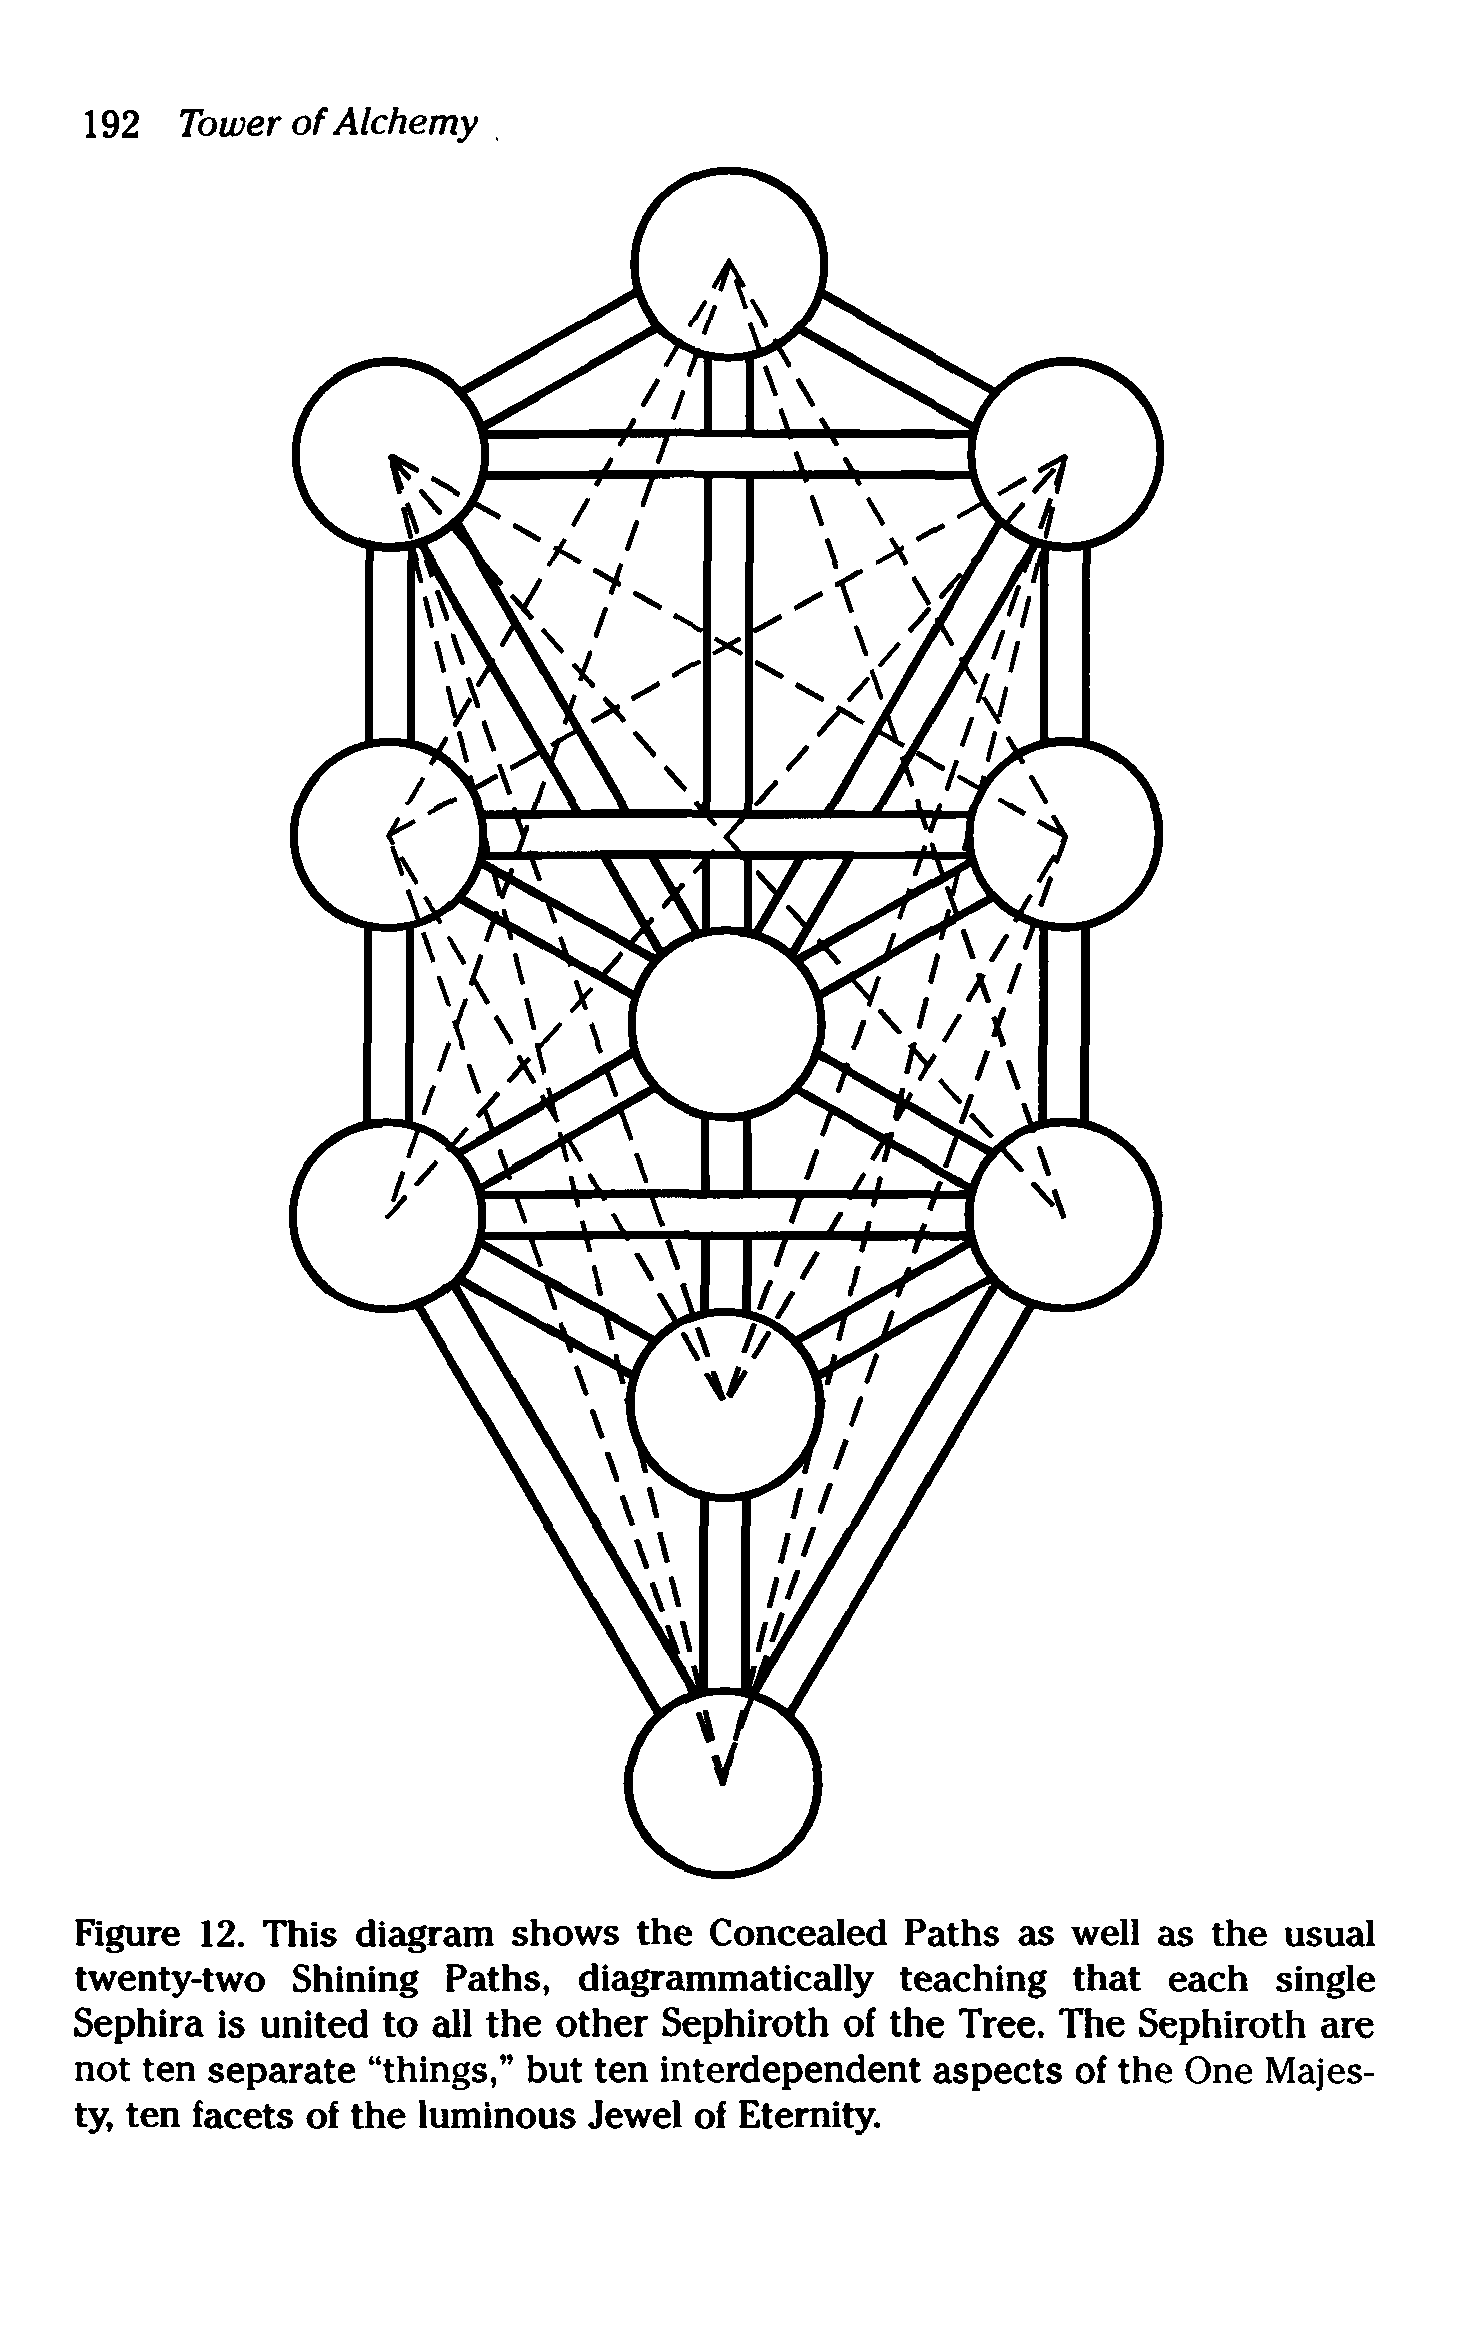 Figure 12. This diagram shows the Concealed Paths as well as the usual twenty-two Shining Paths, diagrammatically teaching that each single Sephira is united to all the other Sephiroth of the Tree. The Sephiroth are not ten separate things, but ten interdependent aspects of the One Majesty, ten facets of the luminous Jewel of Eternity.